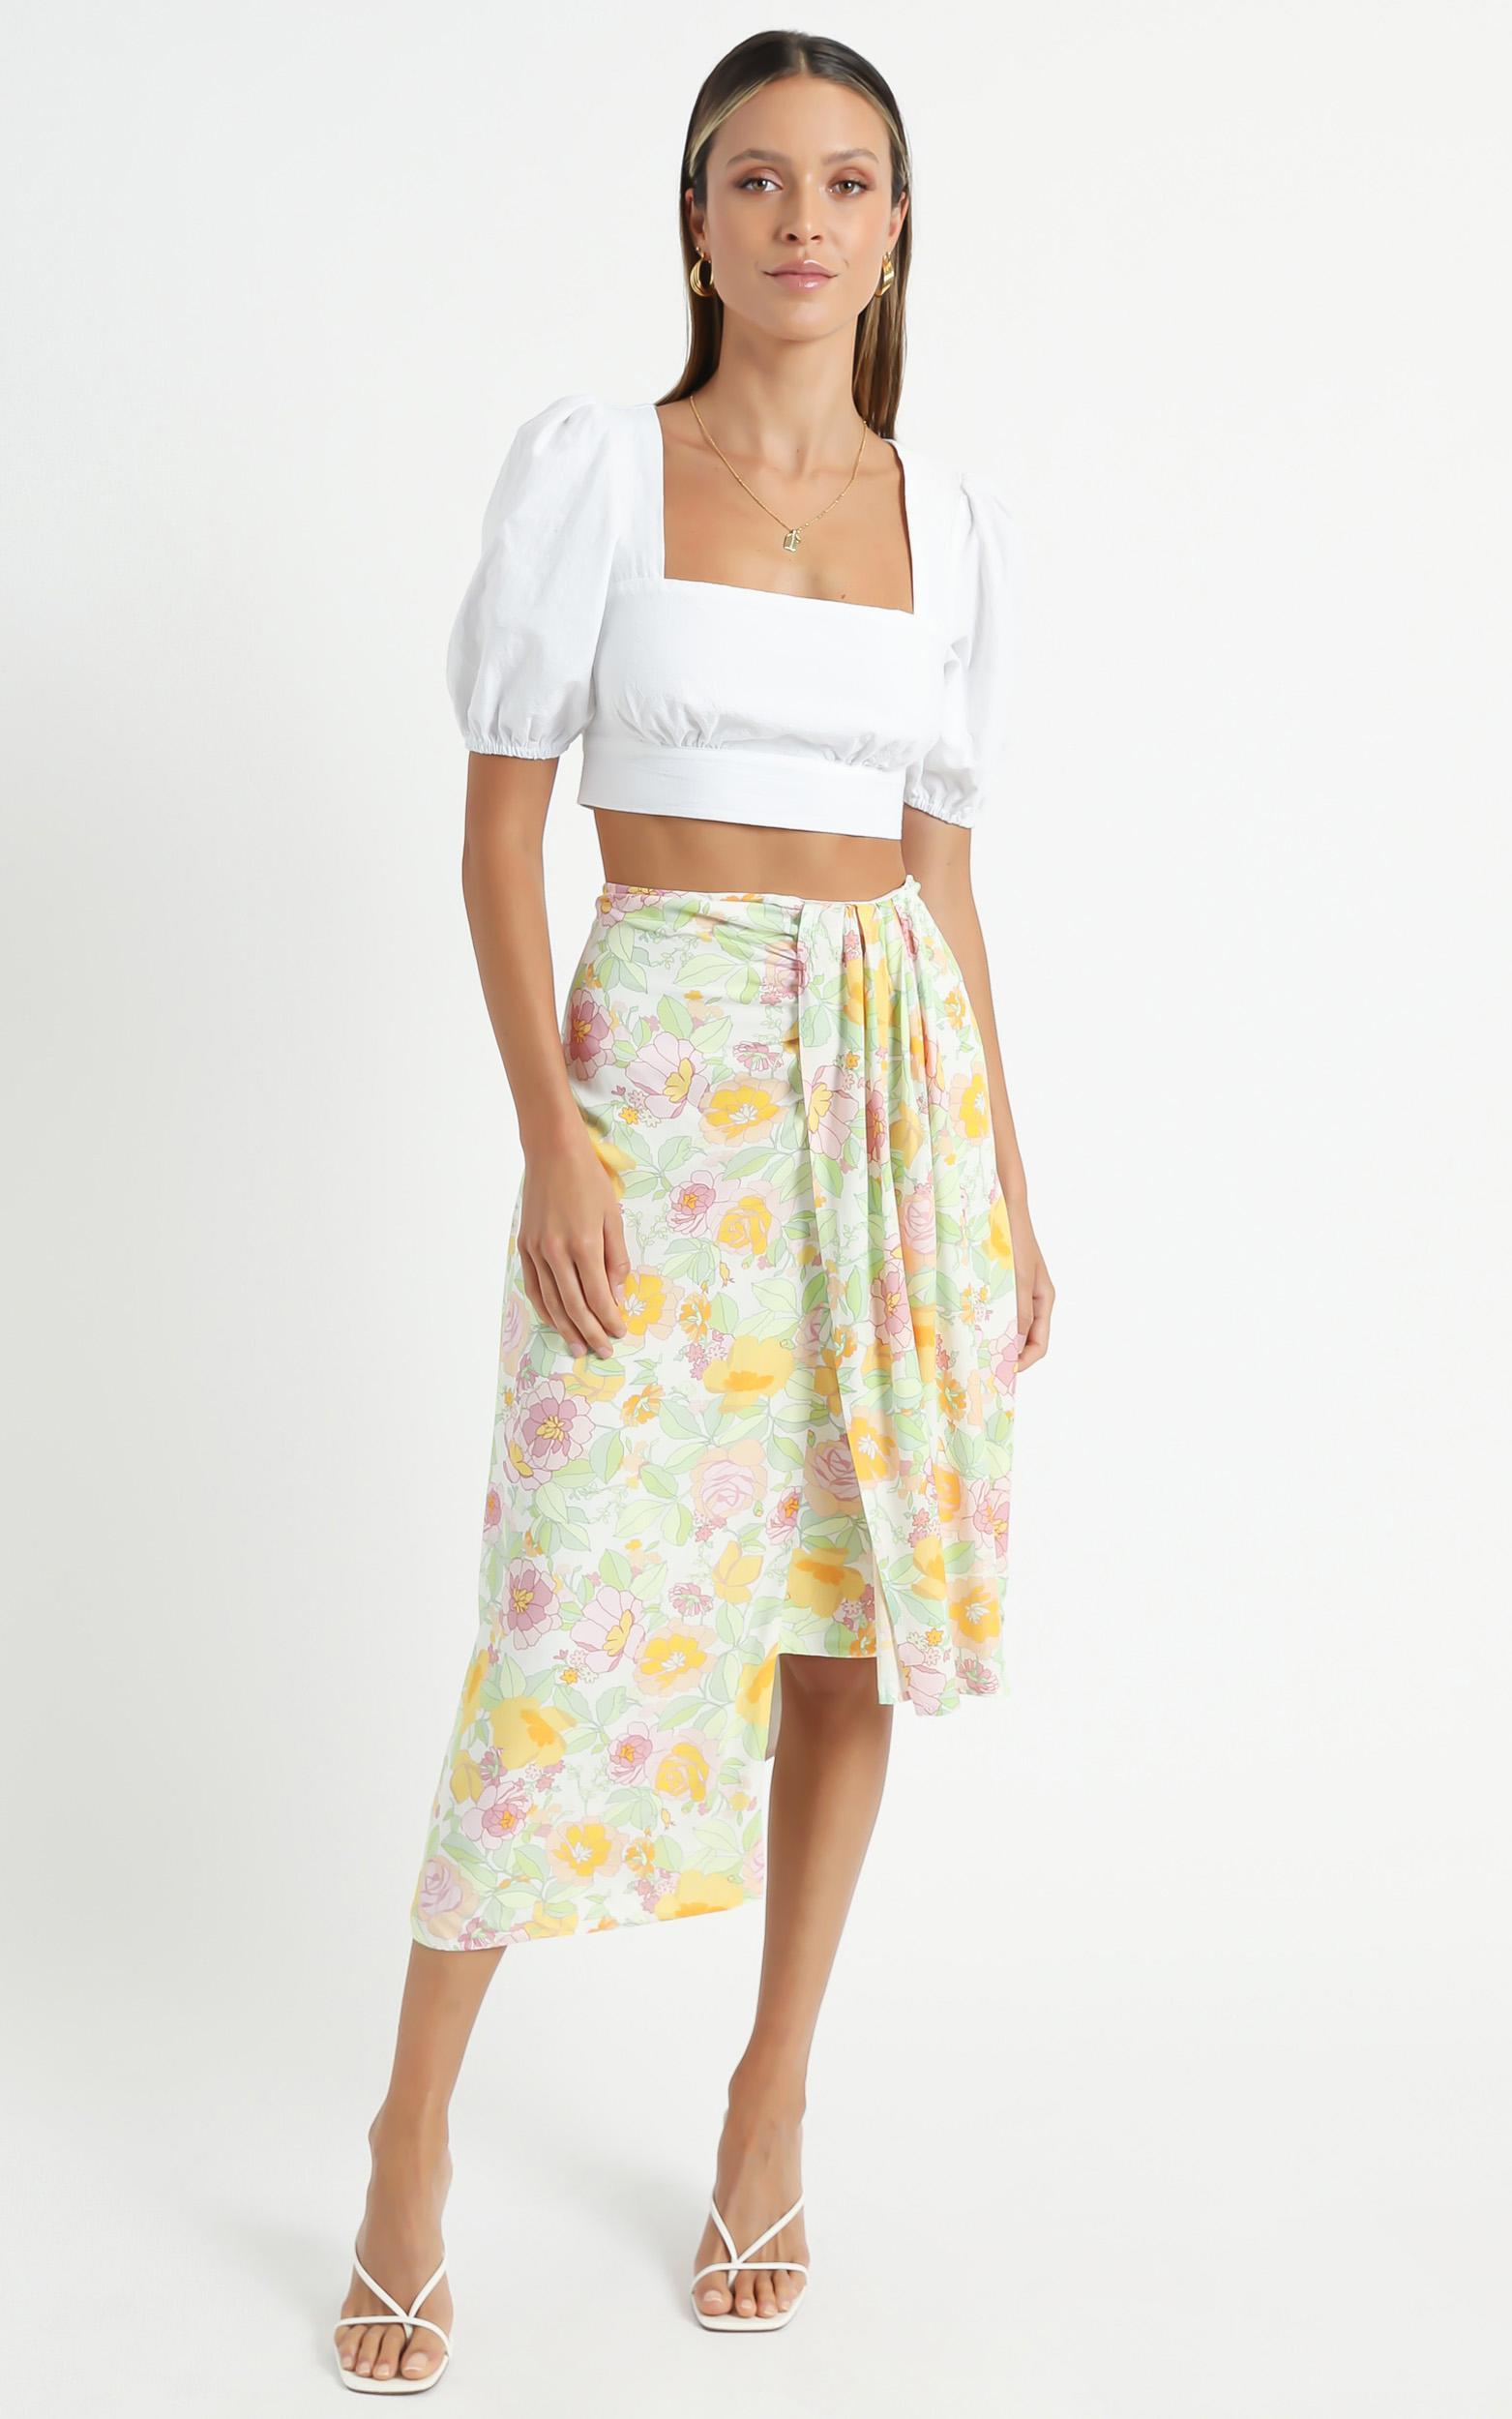 Valley Skirt in Linear Floral - 06, MLT1, hi-res image number null